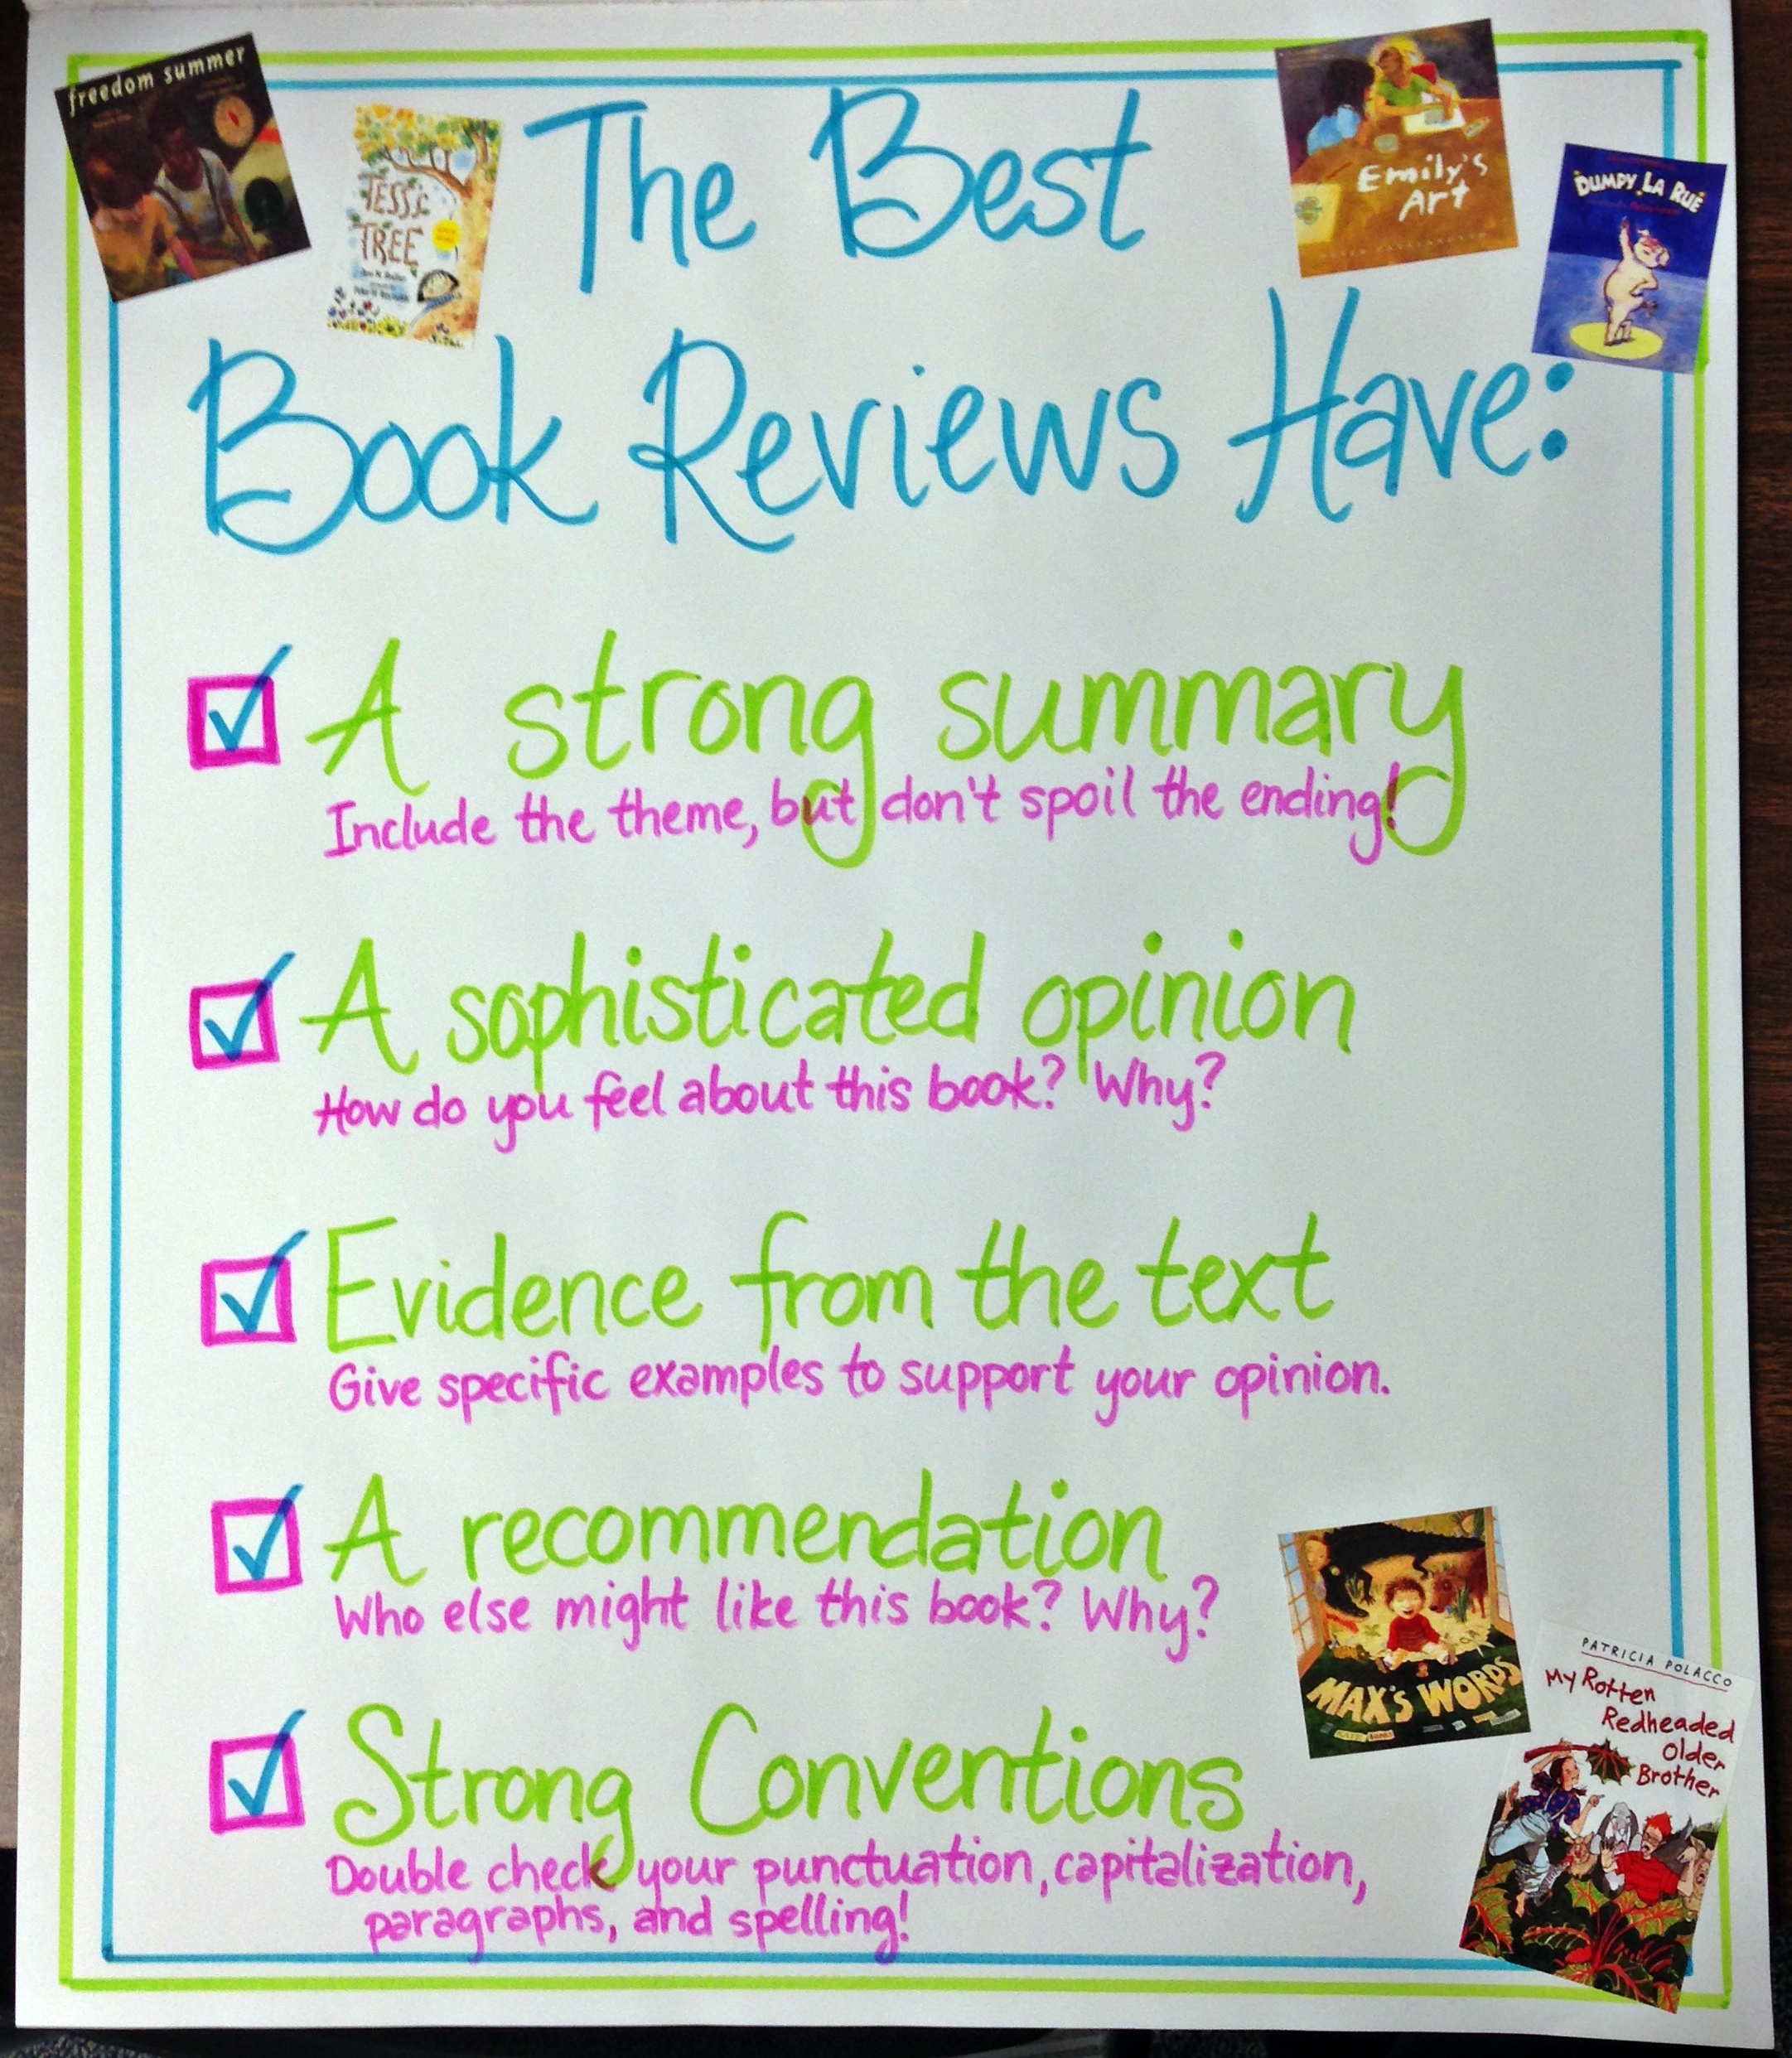 Best book review writer